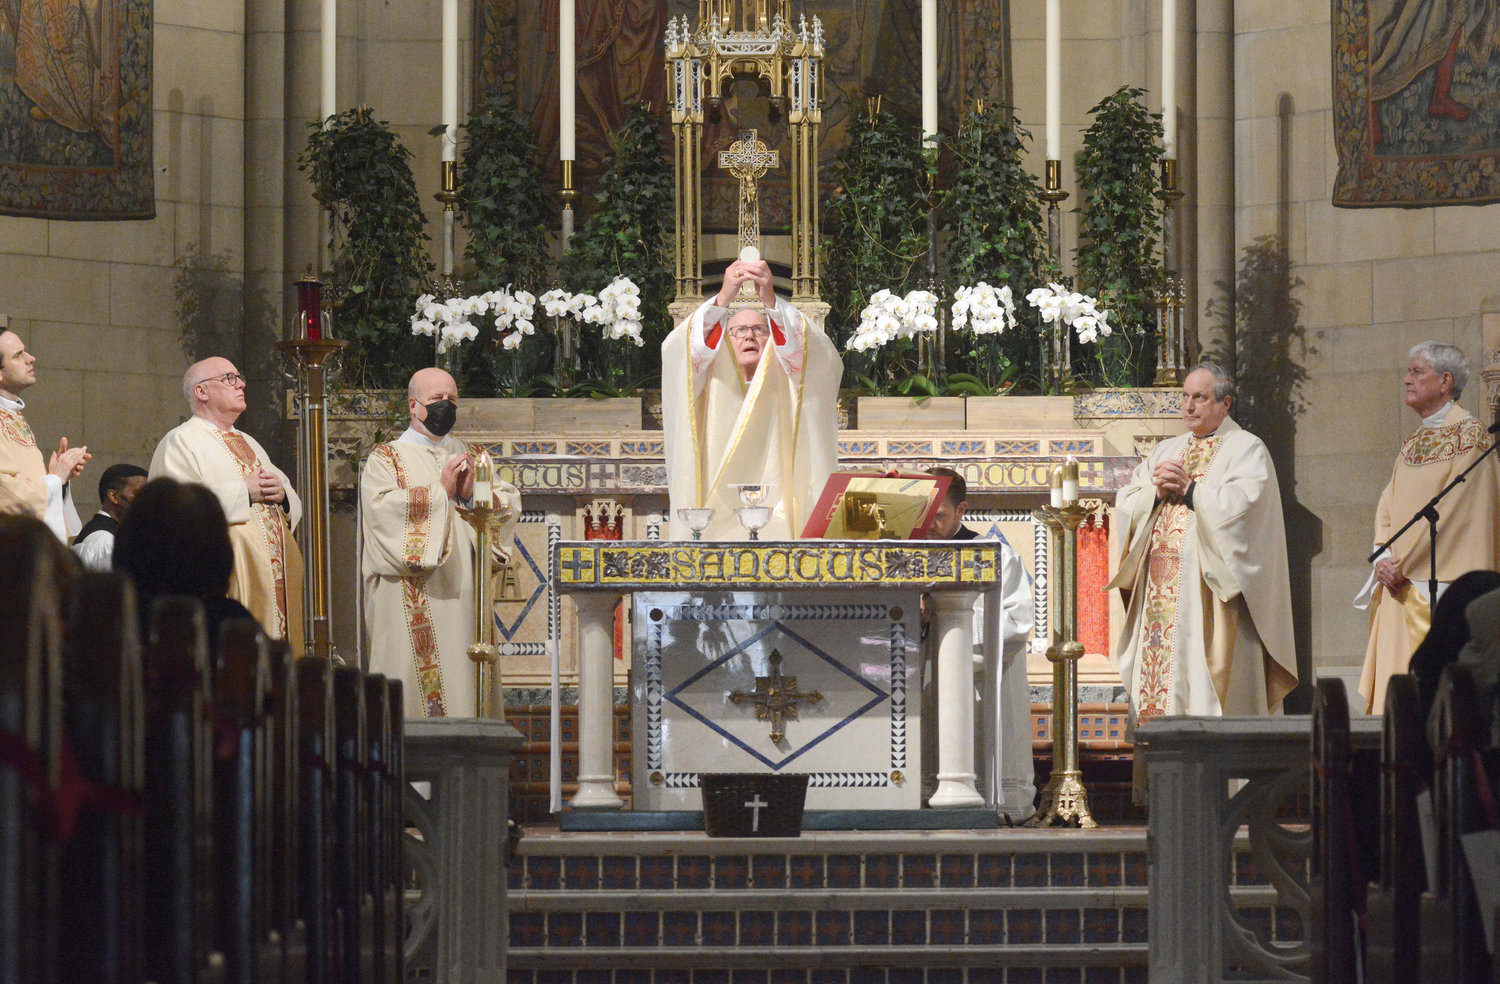 Cardinal Dolan elevates the Eucharist at  Mass marking the 100th anniversary of Blessed Sacrament Church in Manhattan June 20. Standing at the altar, from left, are Father Łukasz Dutkiewicz, parochial vicar; Father David Nolan, pastor; Deacon Scott Reisinger; Cardinal Dolan; Msgr. Thomas P. Sandi, pastor of Holy Trinity in Manhattan and regional dean; and Msgr. Michael Crimmins, in residence.